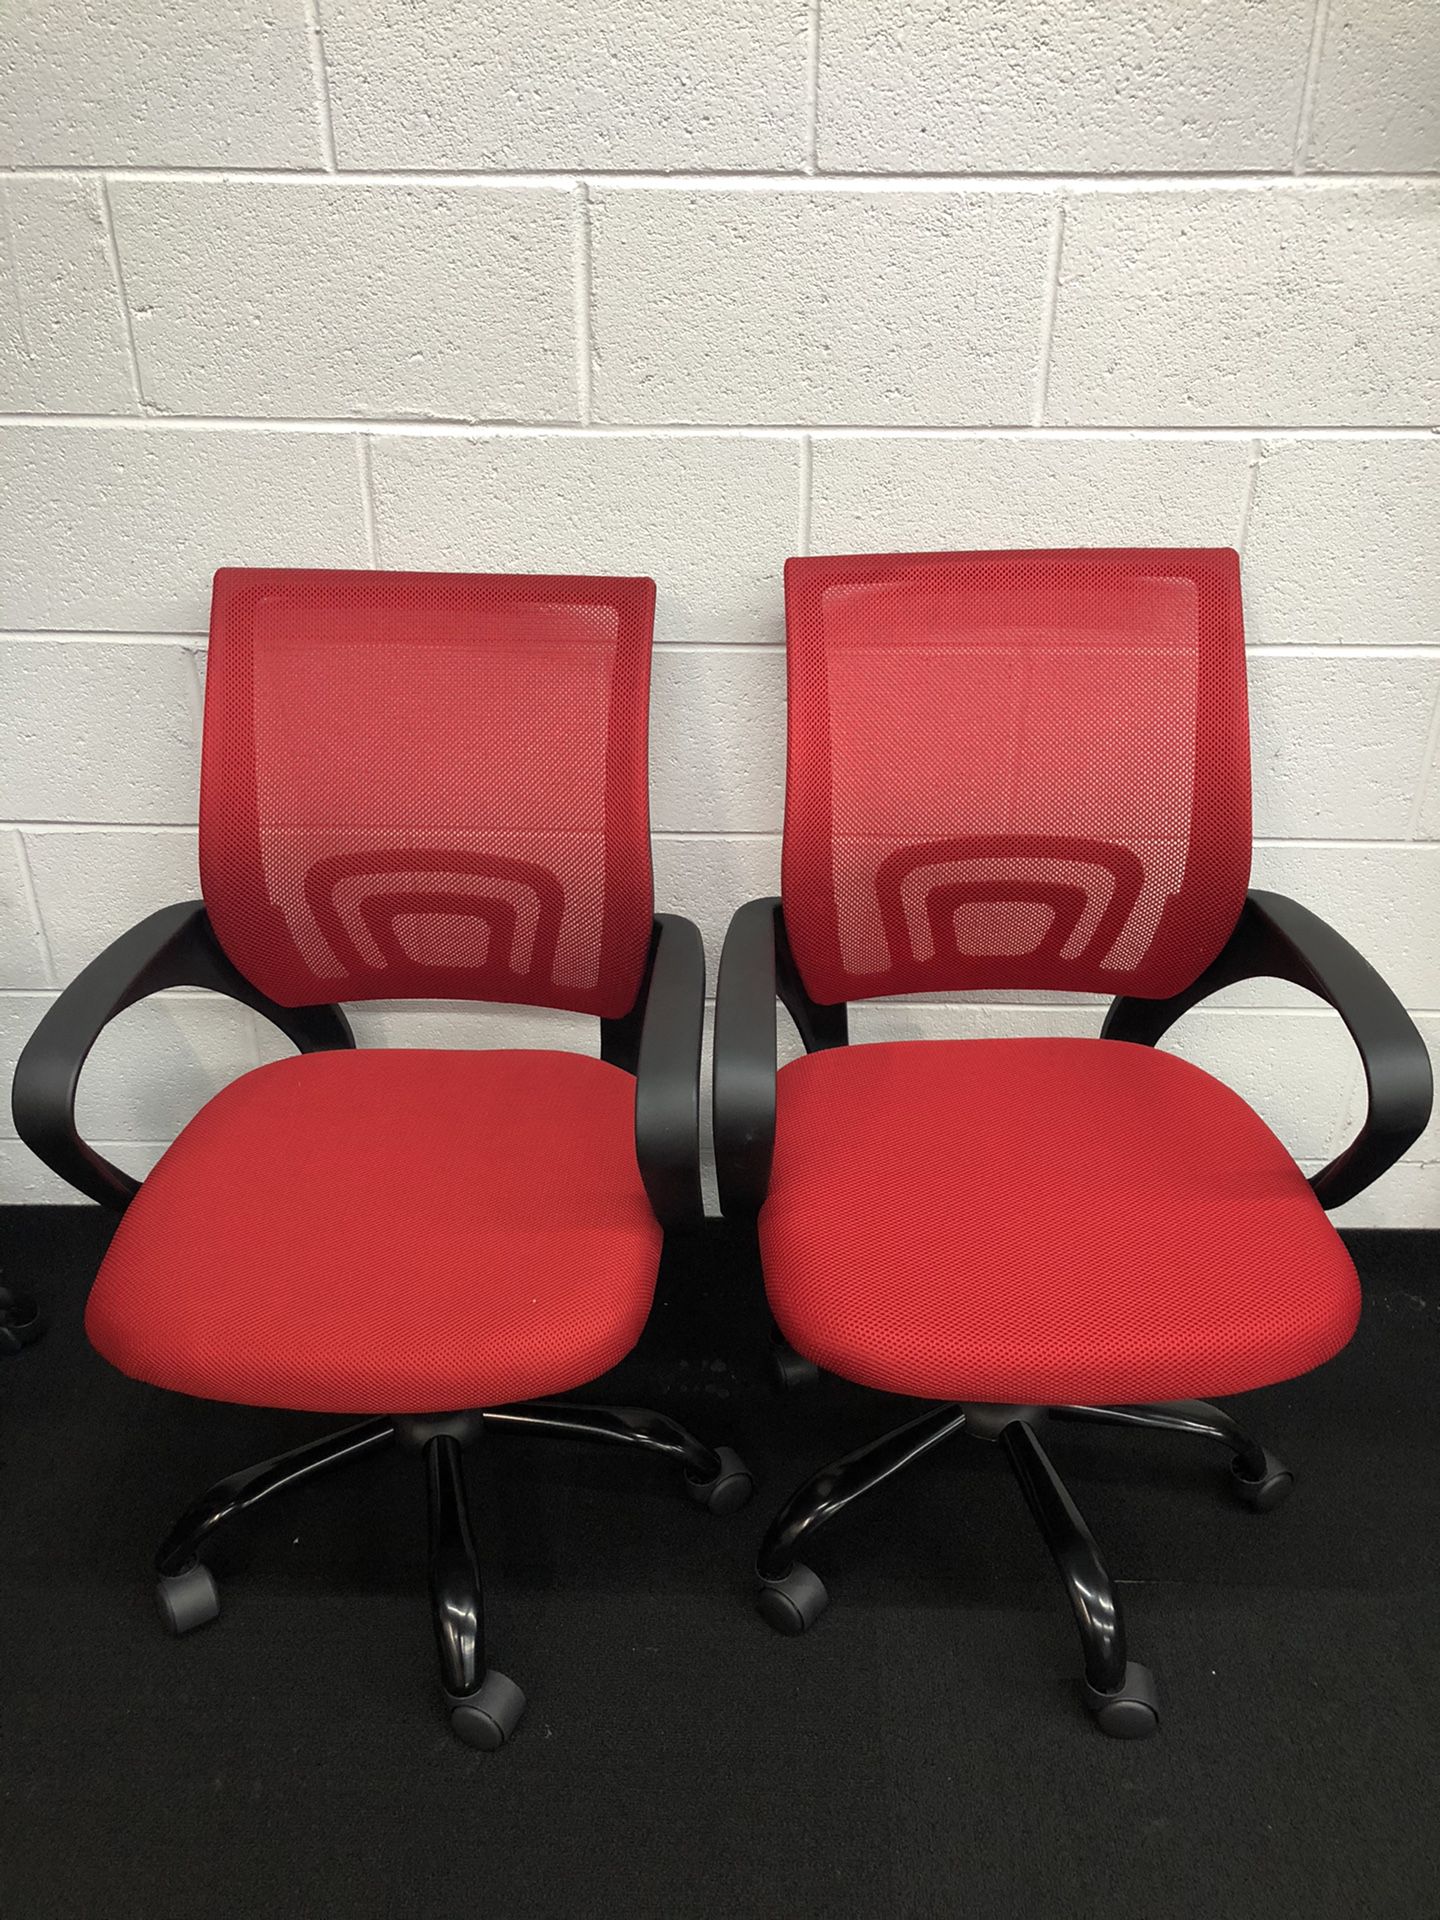 2 BRAND NEW RED ADJUSTABLE MESH OFFICE CHAIRS